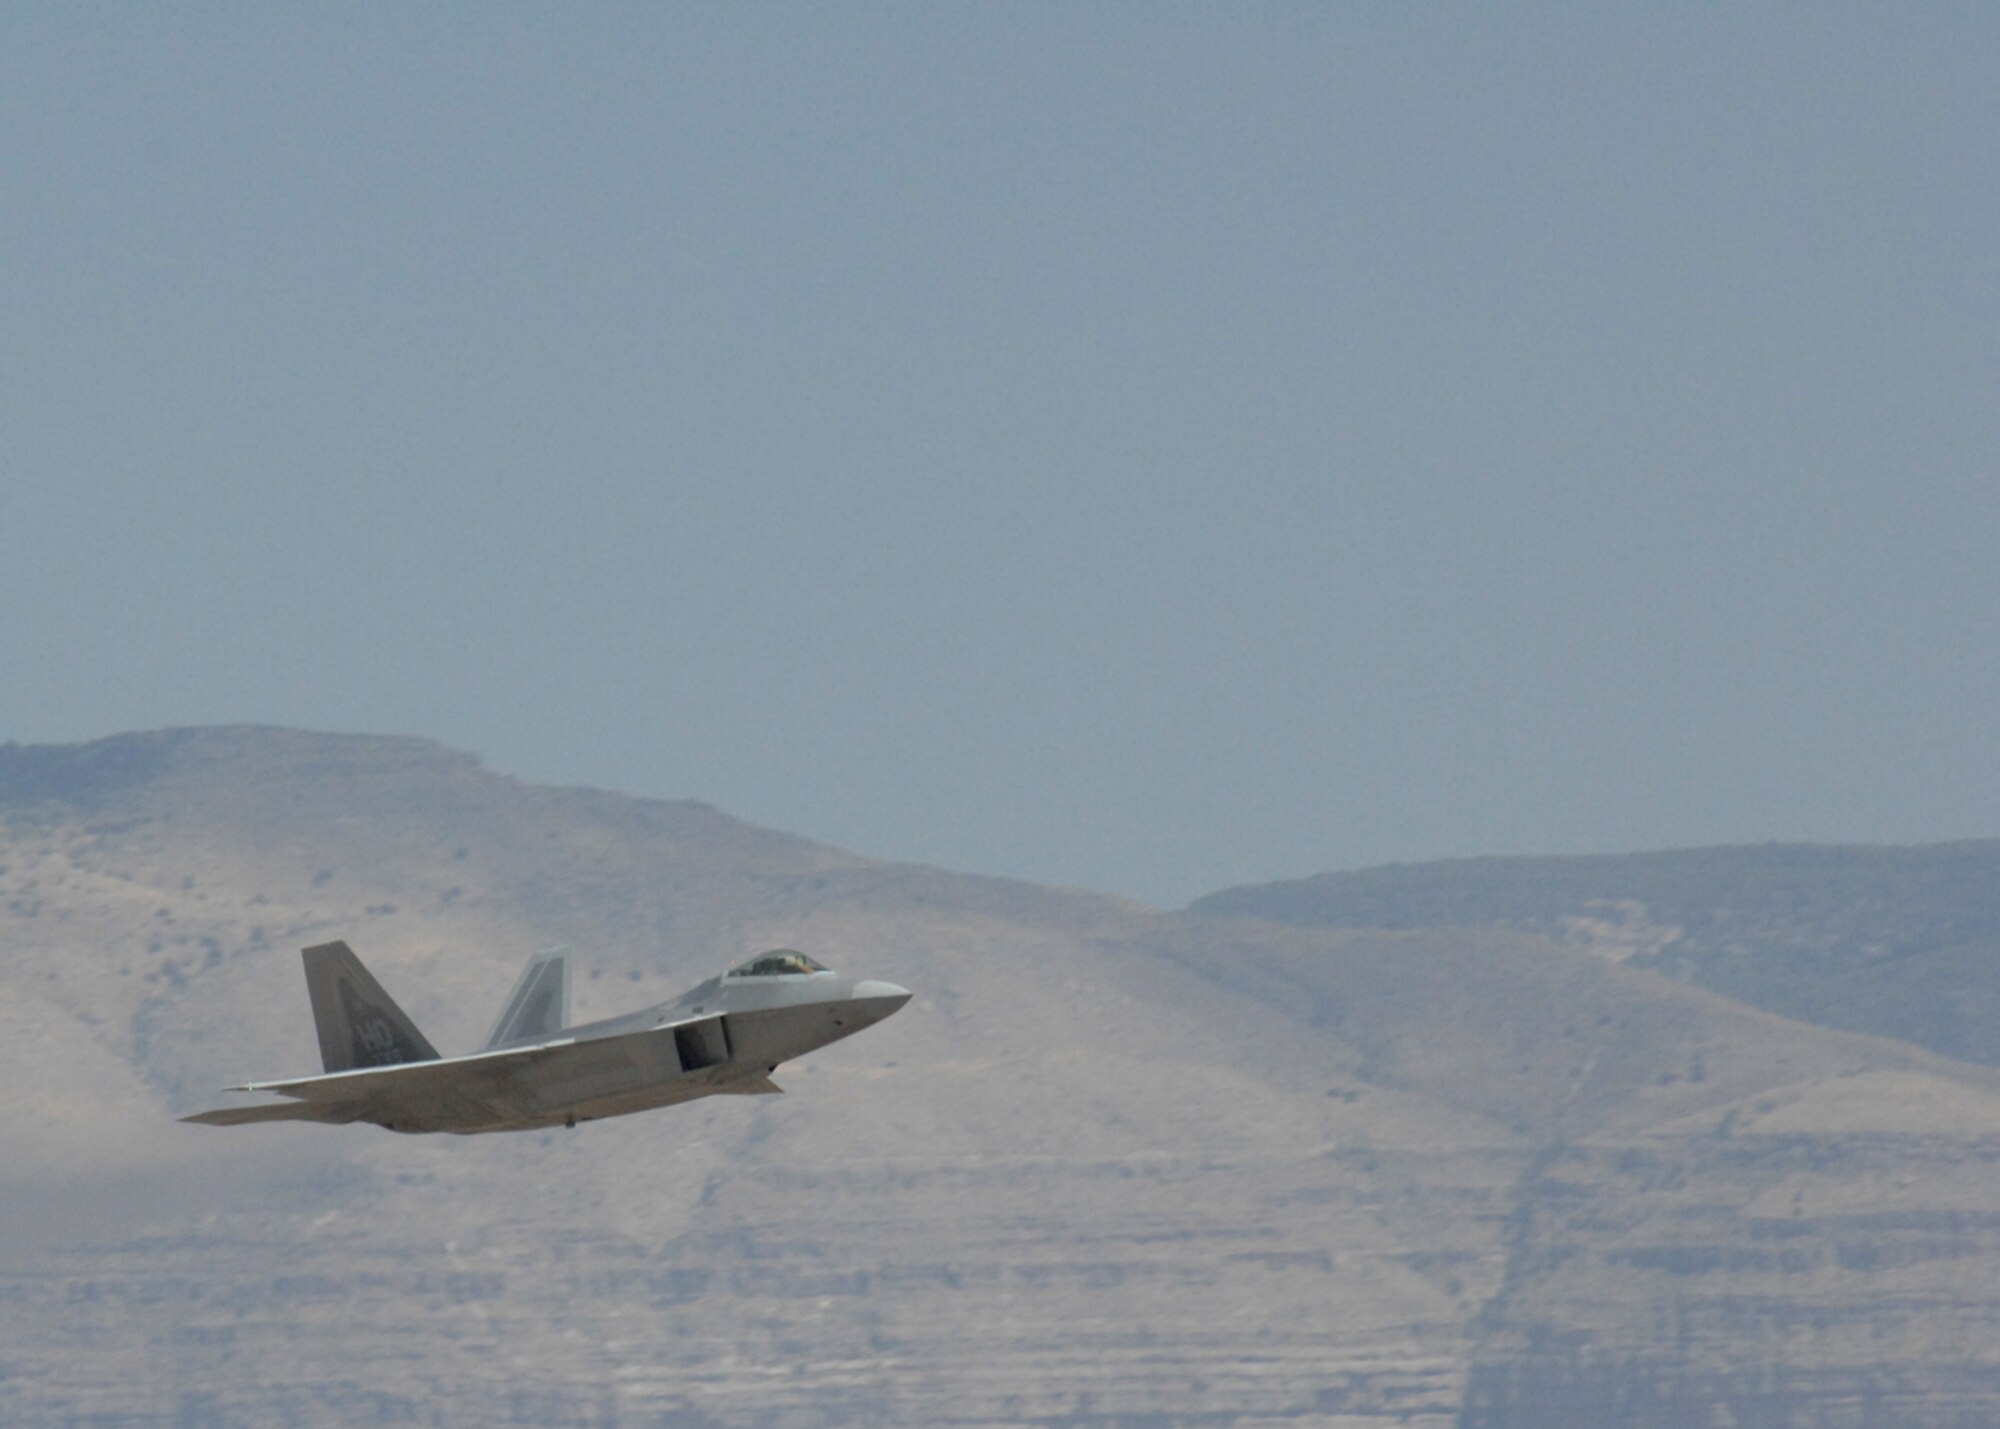 One of two F-22A Raptors fly over Holloman Air Force Base, N.M., June 2. The jets are the first two Holloman-tailed F-22s to arrive on base. Prior to landing, the jets flew over the Tularosa Basin, allowing the local community a chance to witness the future of Holloman. (U.S. Air Force photo/Senior Airman Tiffany Trojca)